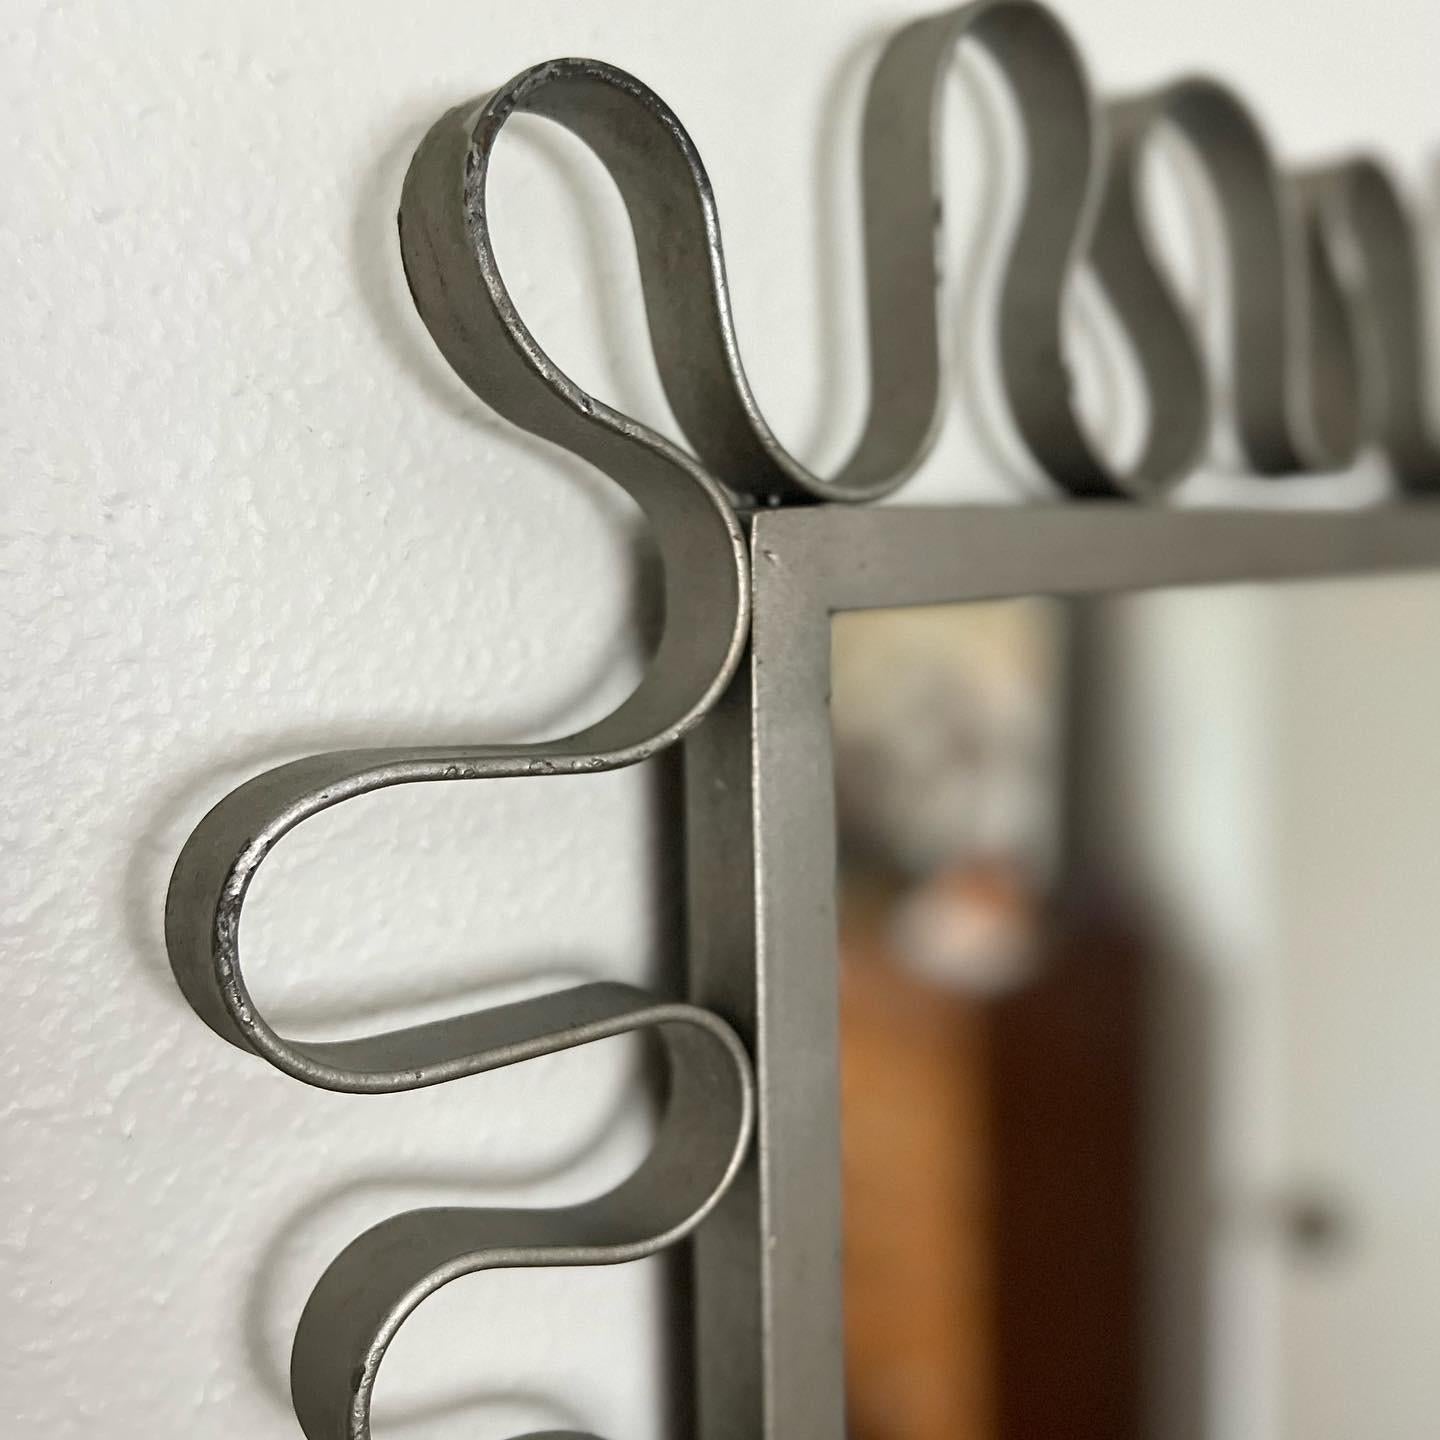 A vintage rectangular wall mirror featuring a silver iron frame in a beautiful curved design. Get you an original squiggly mirror! Can be used horizontal or vertical. In great vintage condition. Some patina and areas of paint loss to the silver